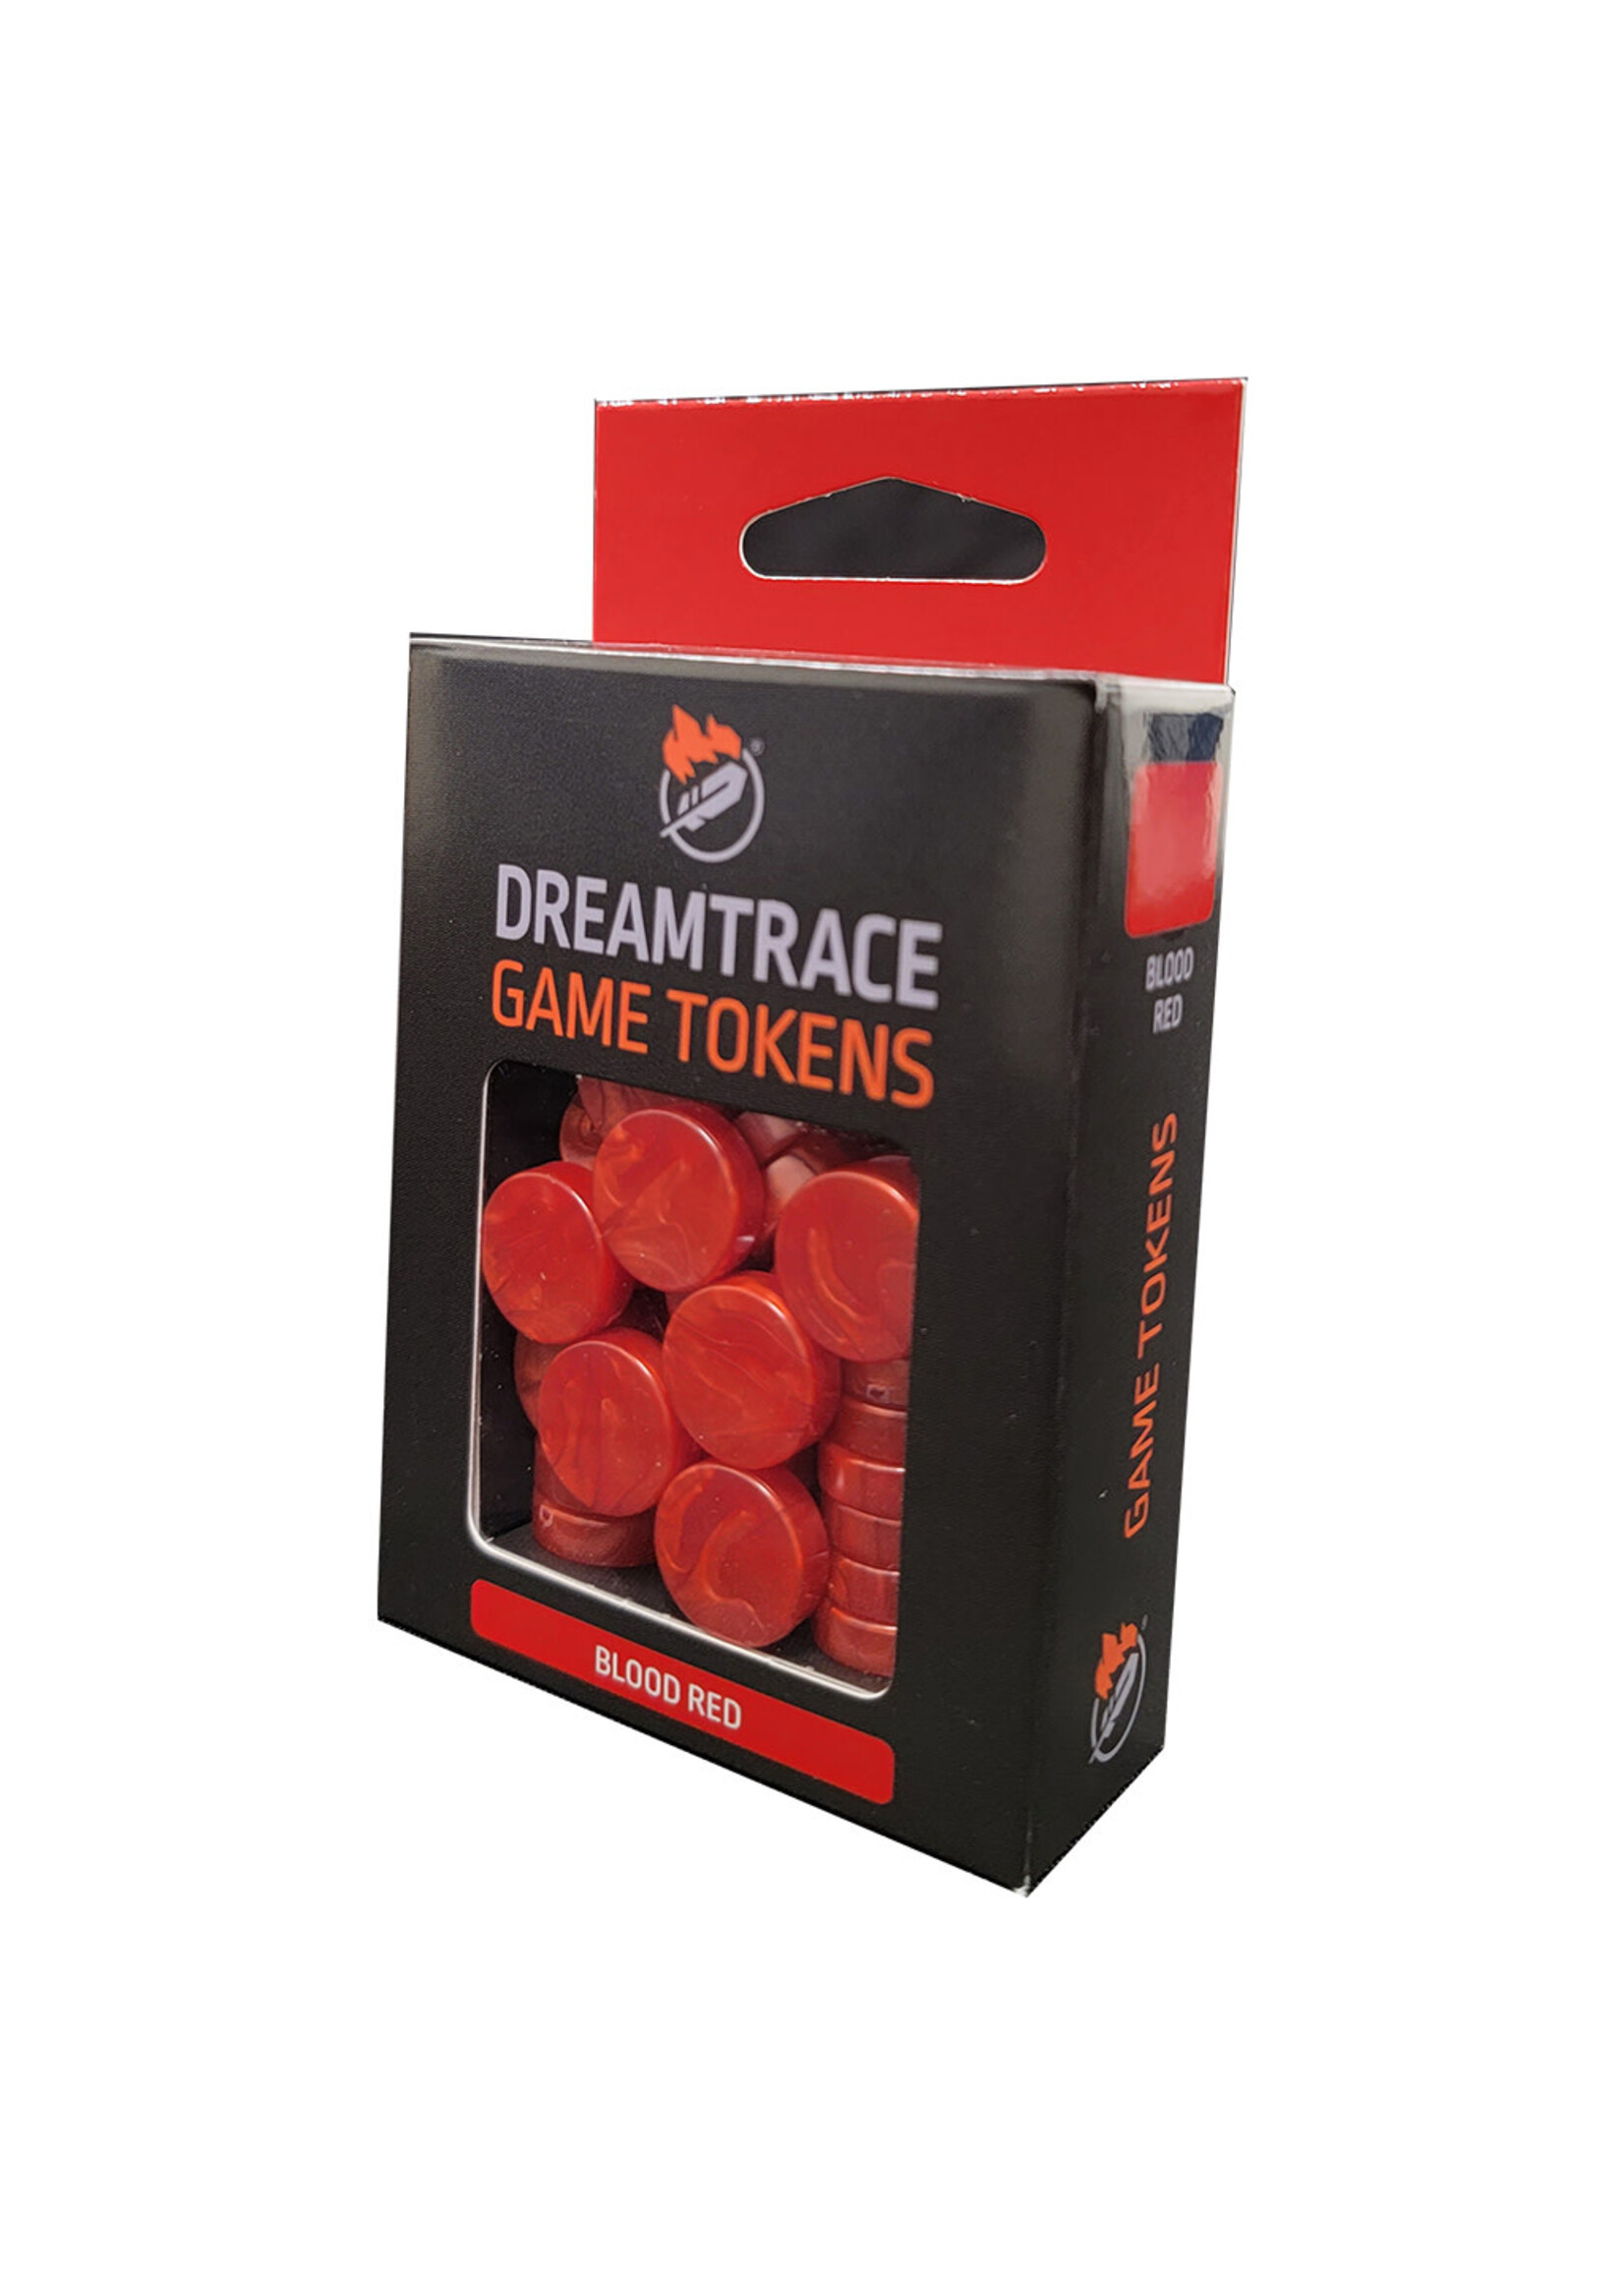 Ghost Galaxy DreamTrace Gaming Tokens: Blood Red